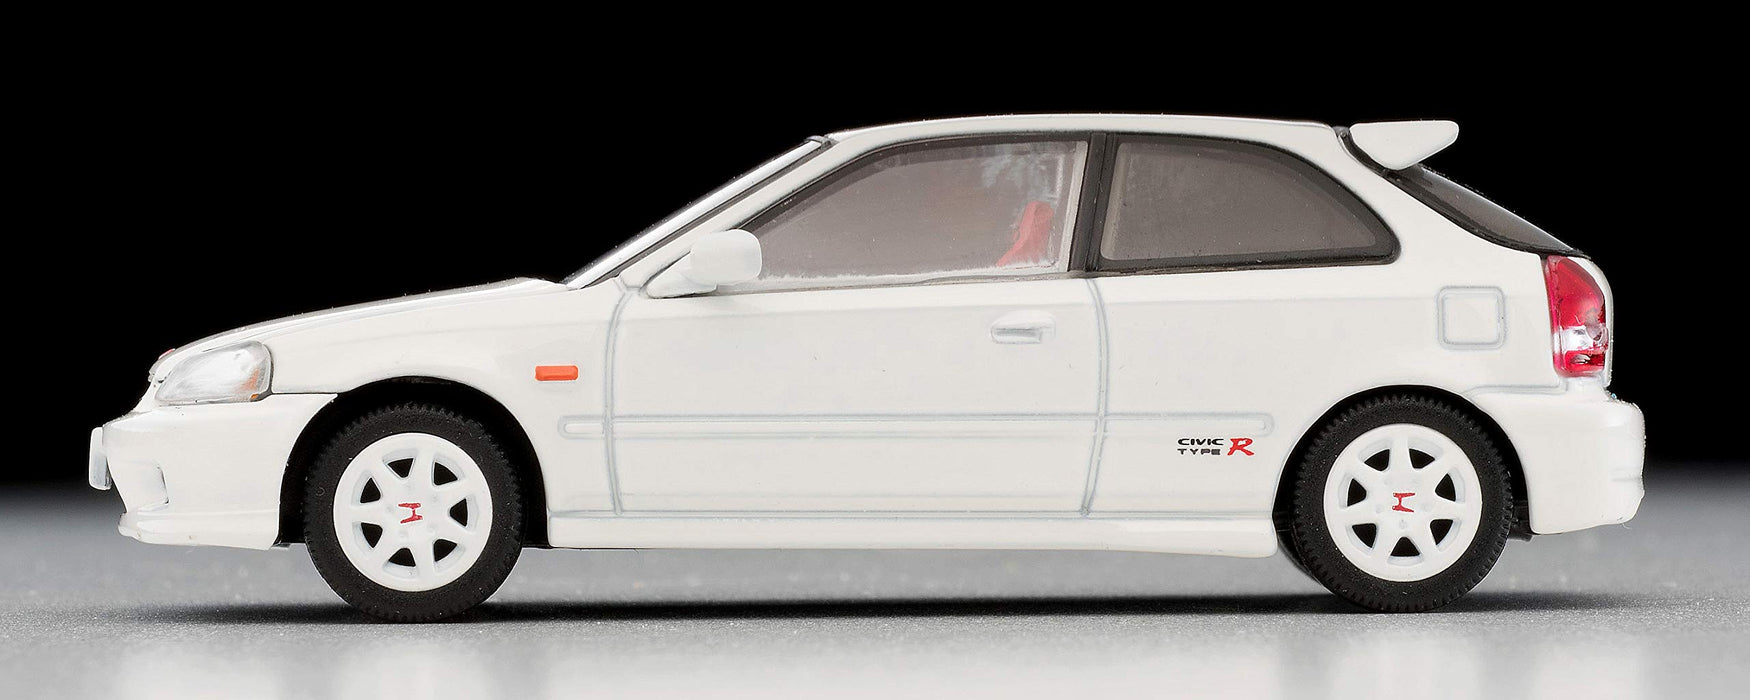 Tomytec Tomica Limited Vintage Neo Honda Civic Type R 99 1/64 Scale White Model